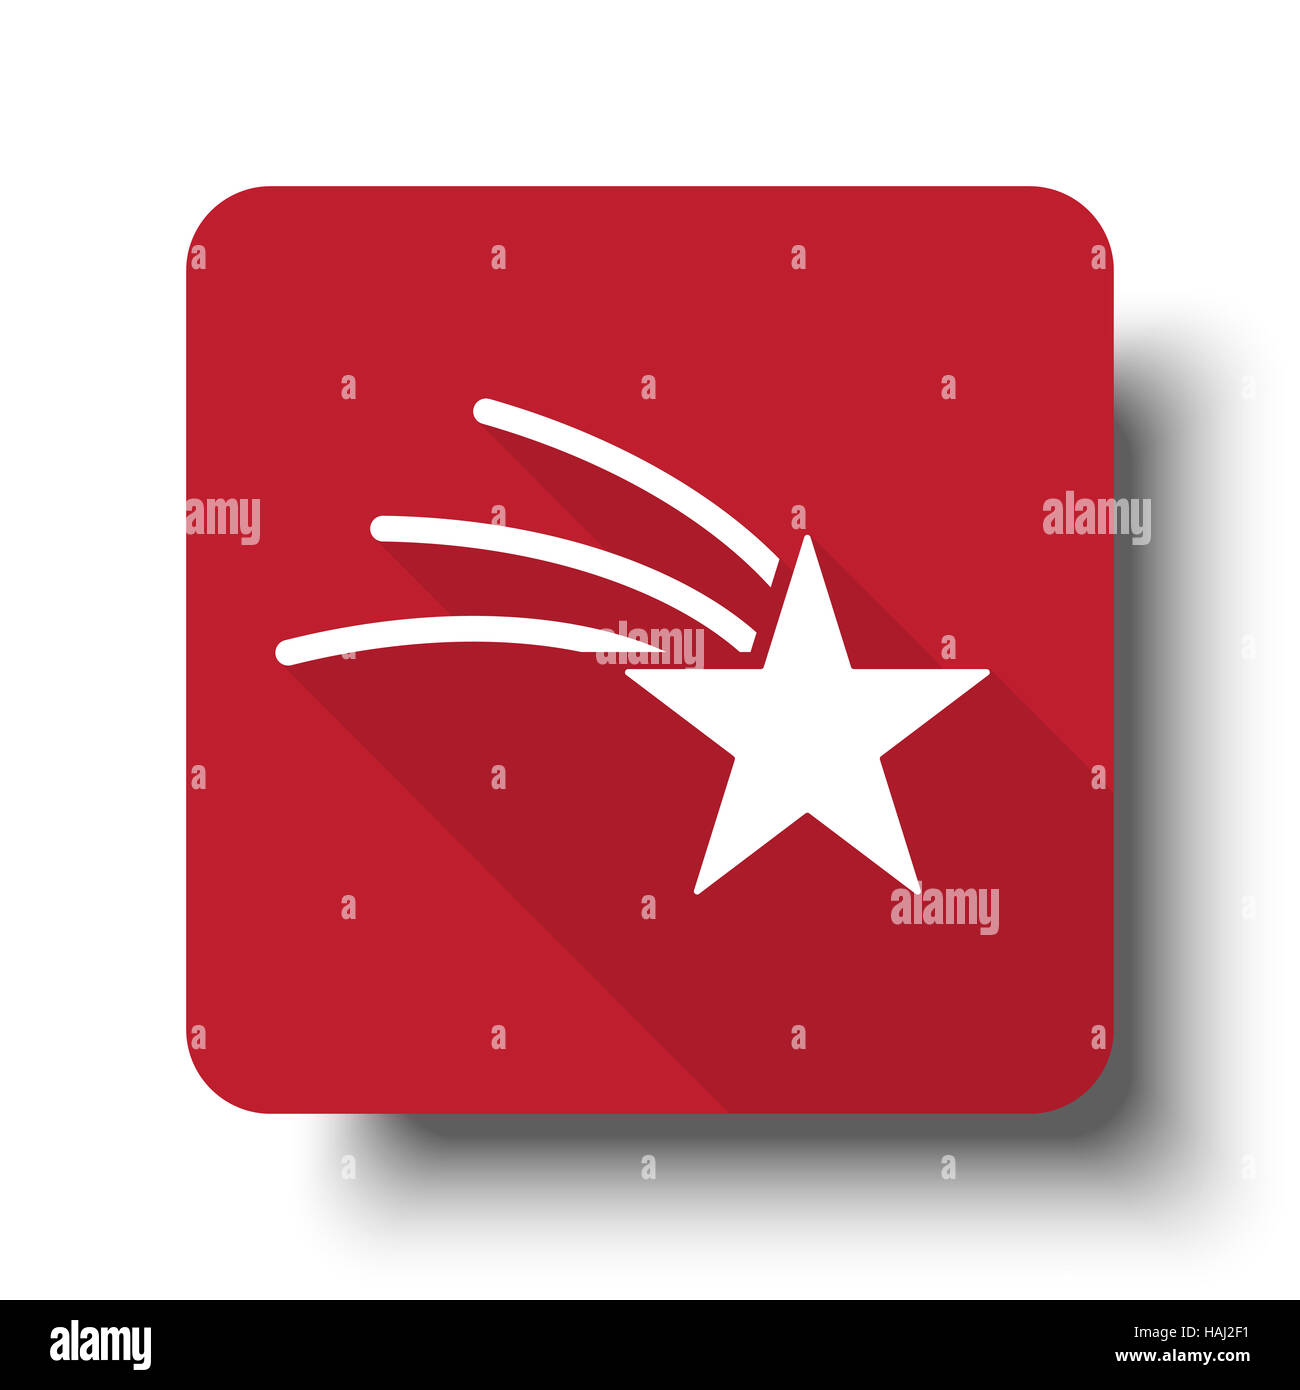 Flat Shooting Star web icon on red button with drop shadow Stock Photo